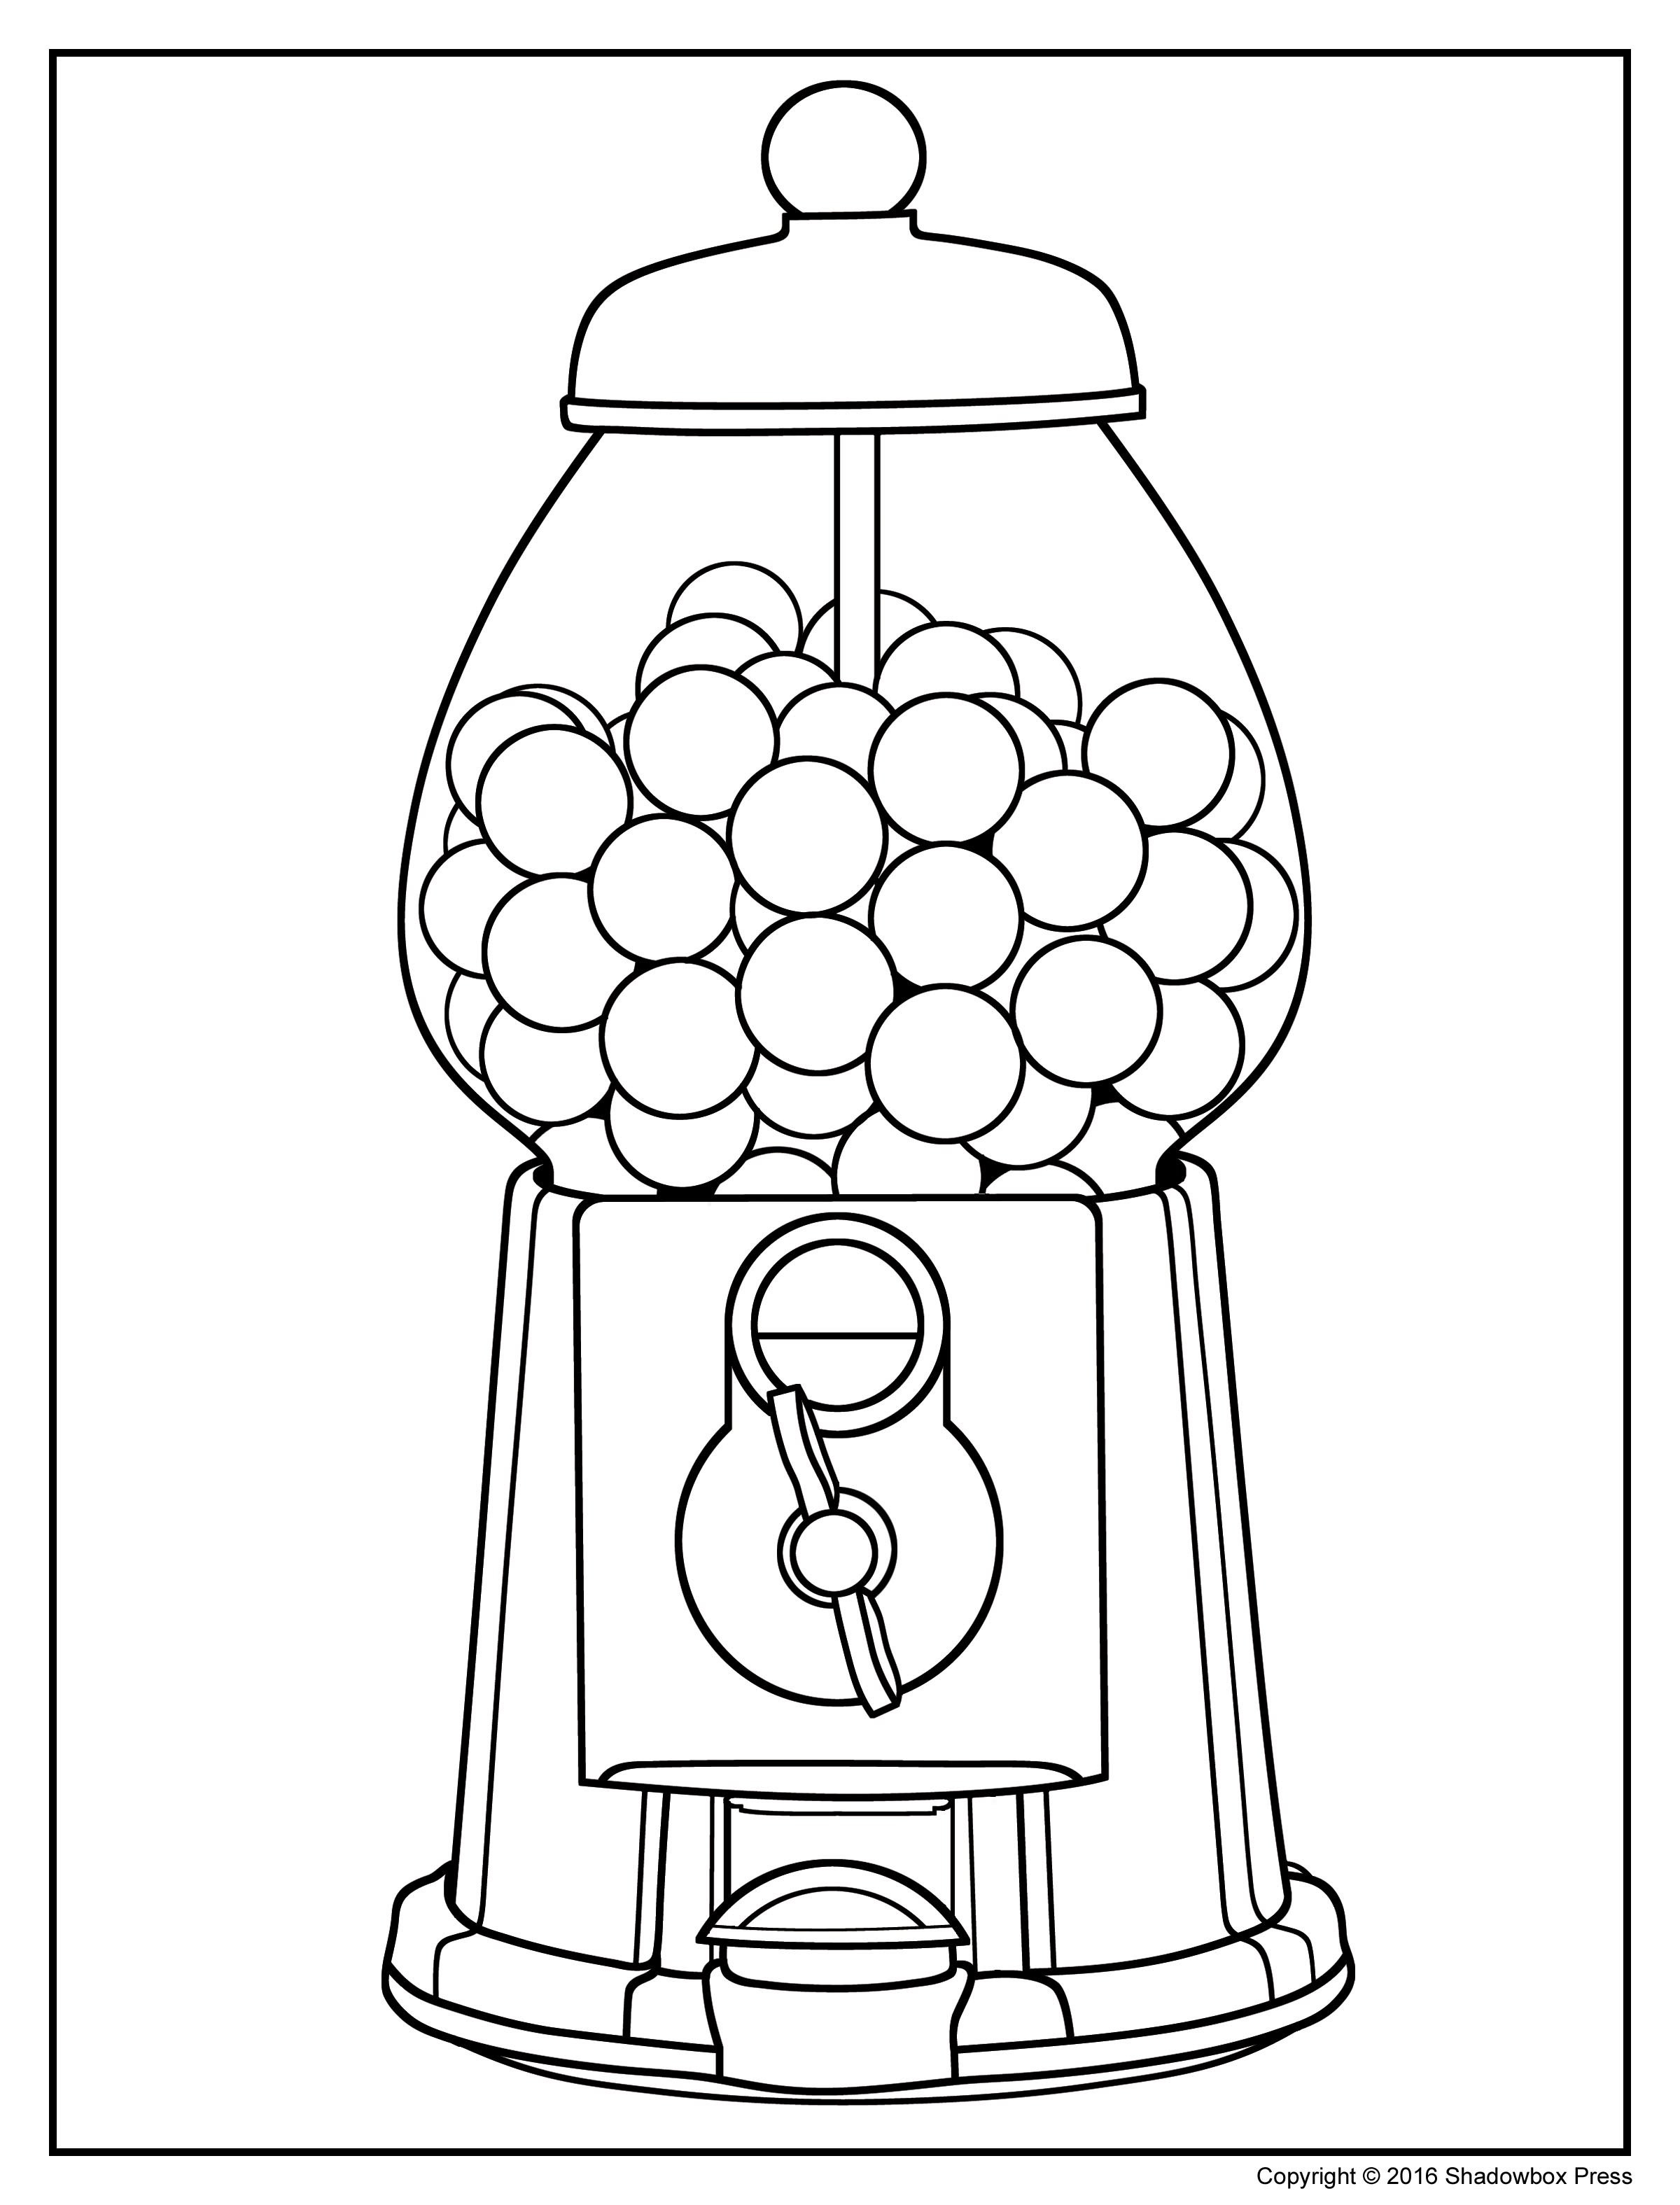 Best ideas about Printable Coloring Pages For Adults With Dementia
. Save or Pin Free Downloadable Coloring Pages for Adults with Dementia Now.